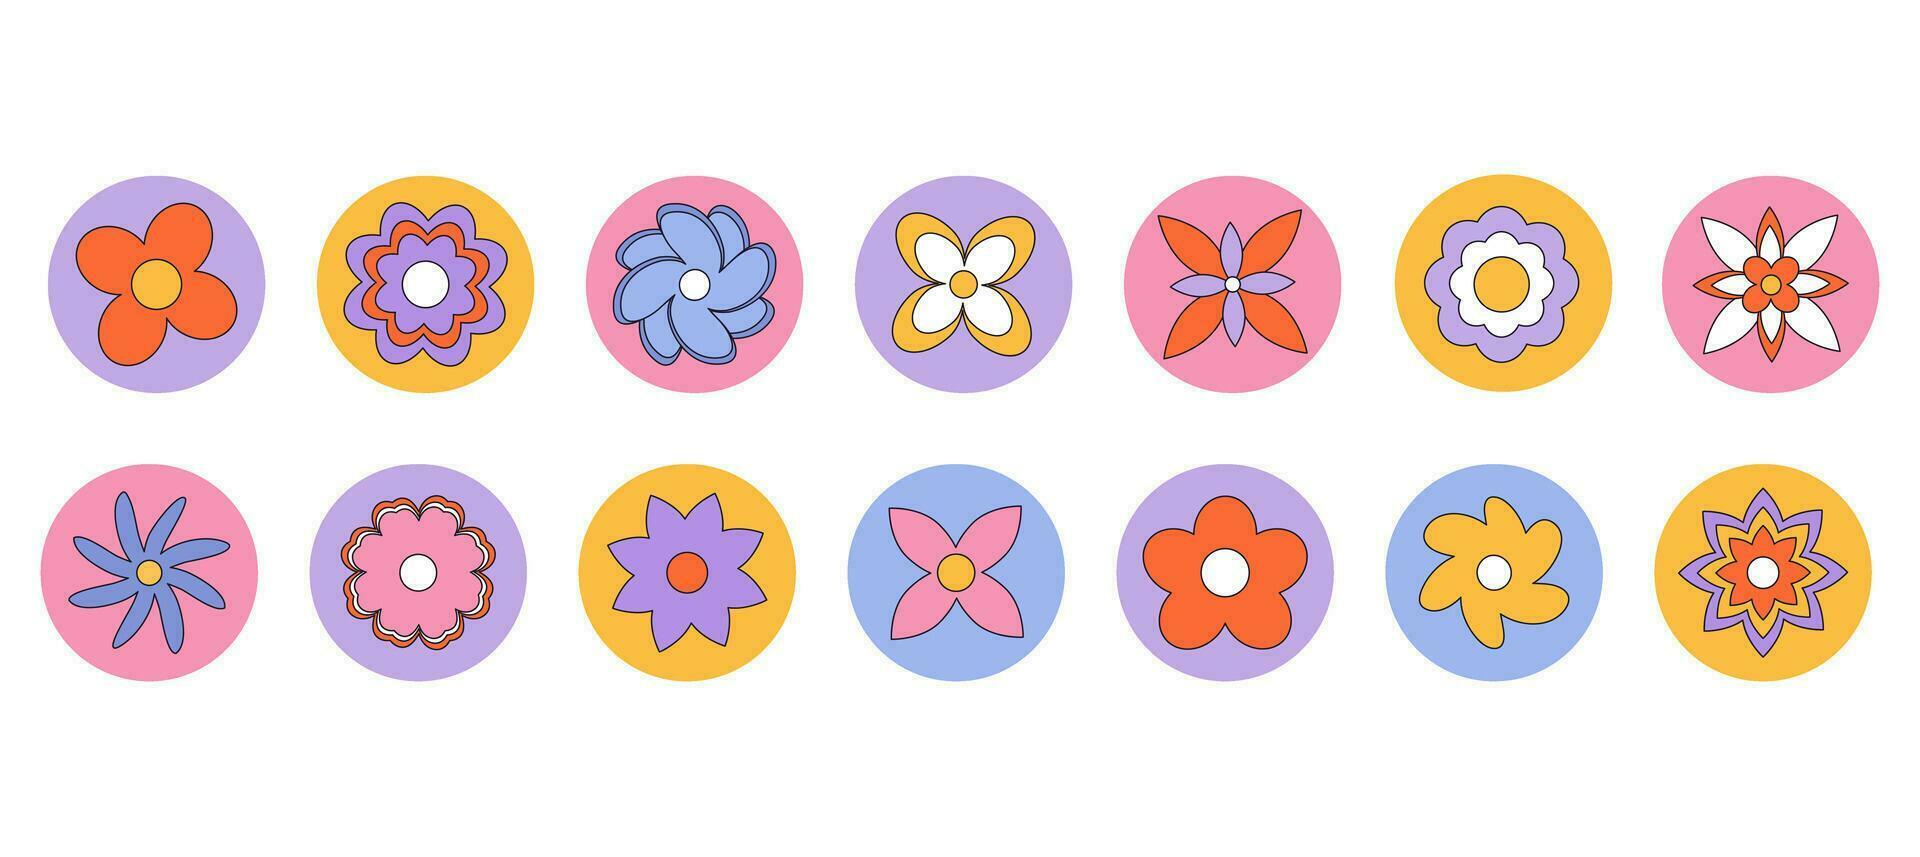 Colorful groovy retro flower daisy sticker set. Stickers in trendy 70s style vector